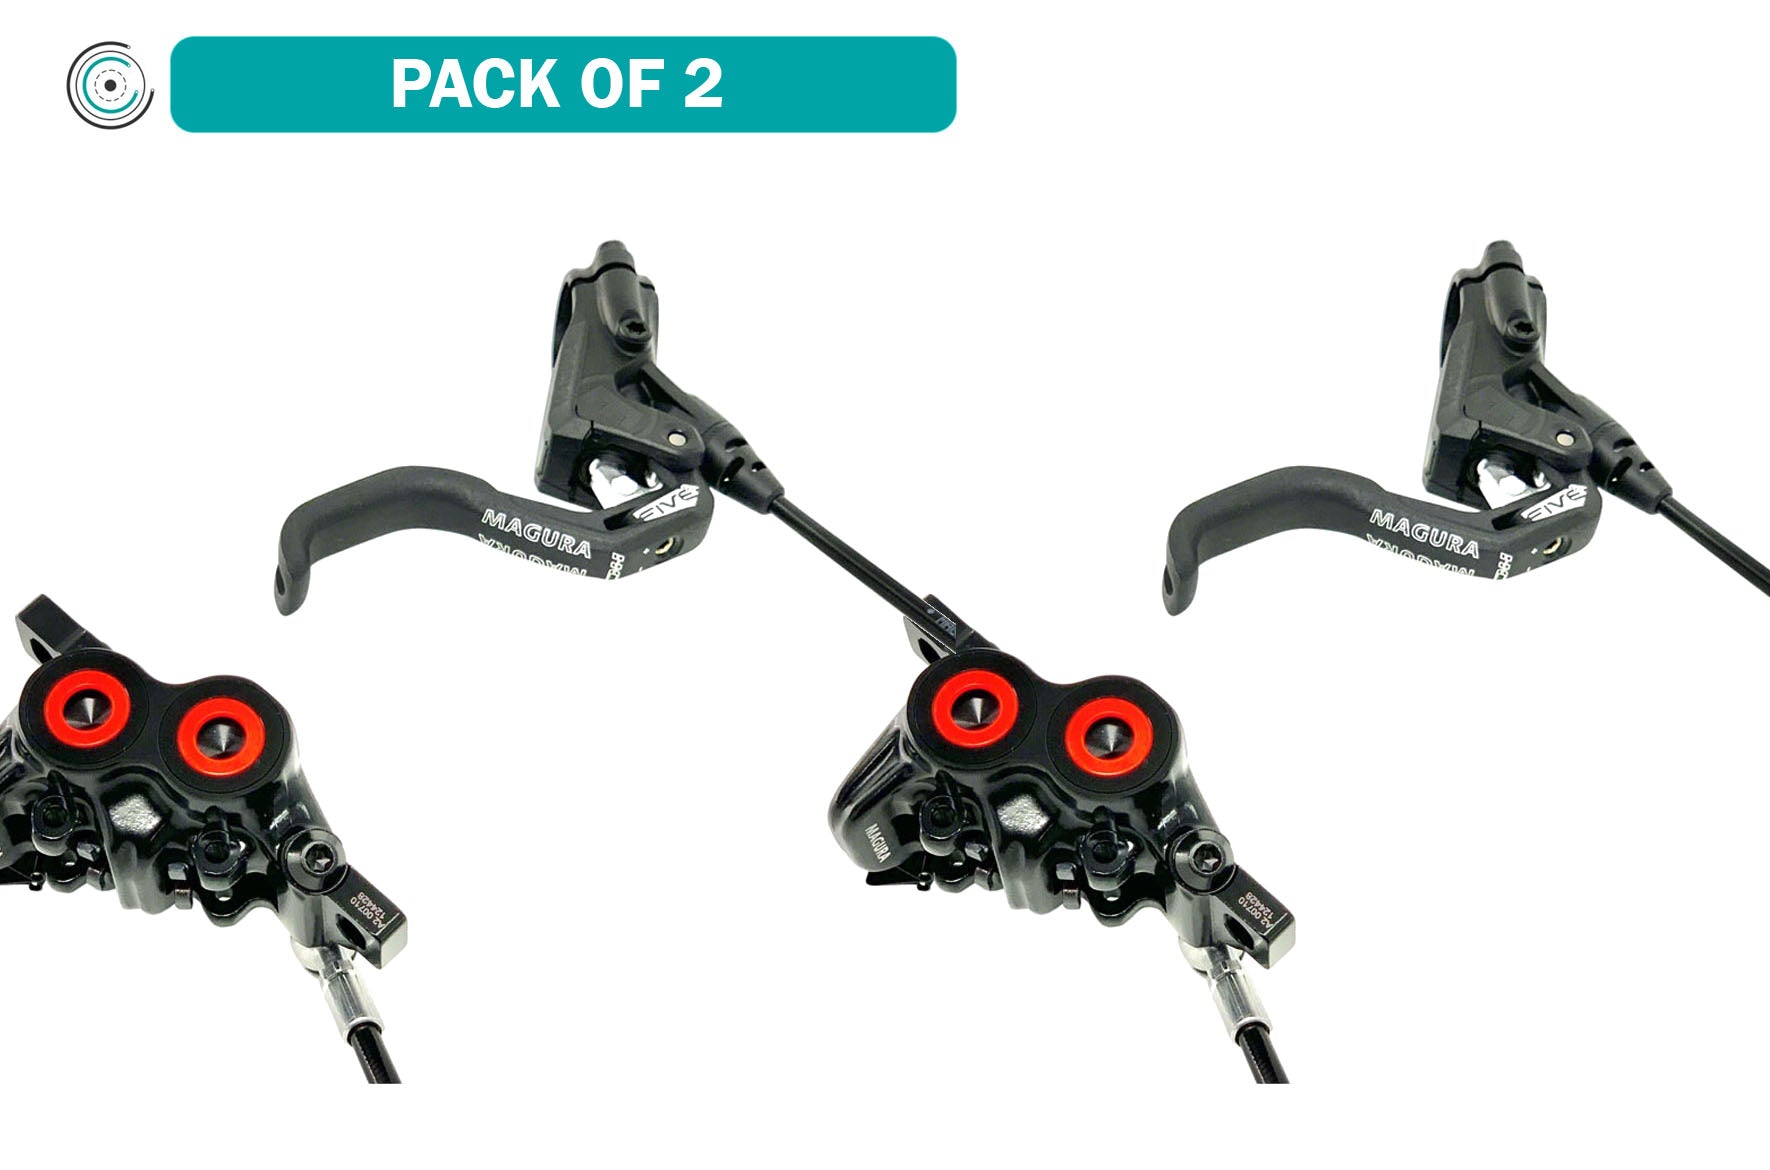 Magura MT5 HC Disc Brakes and Levers - Front & Rear, Post Mount, Pack of 2